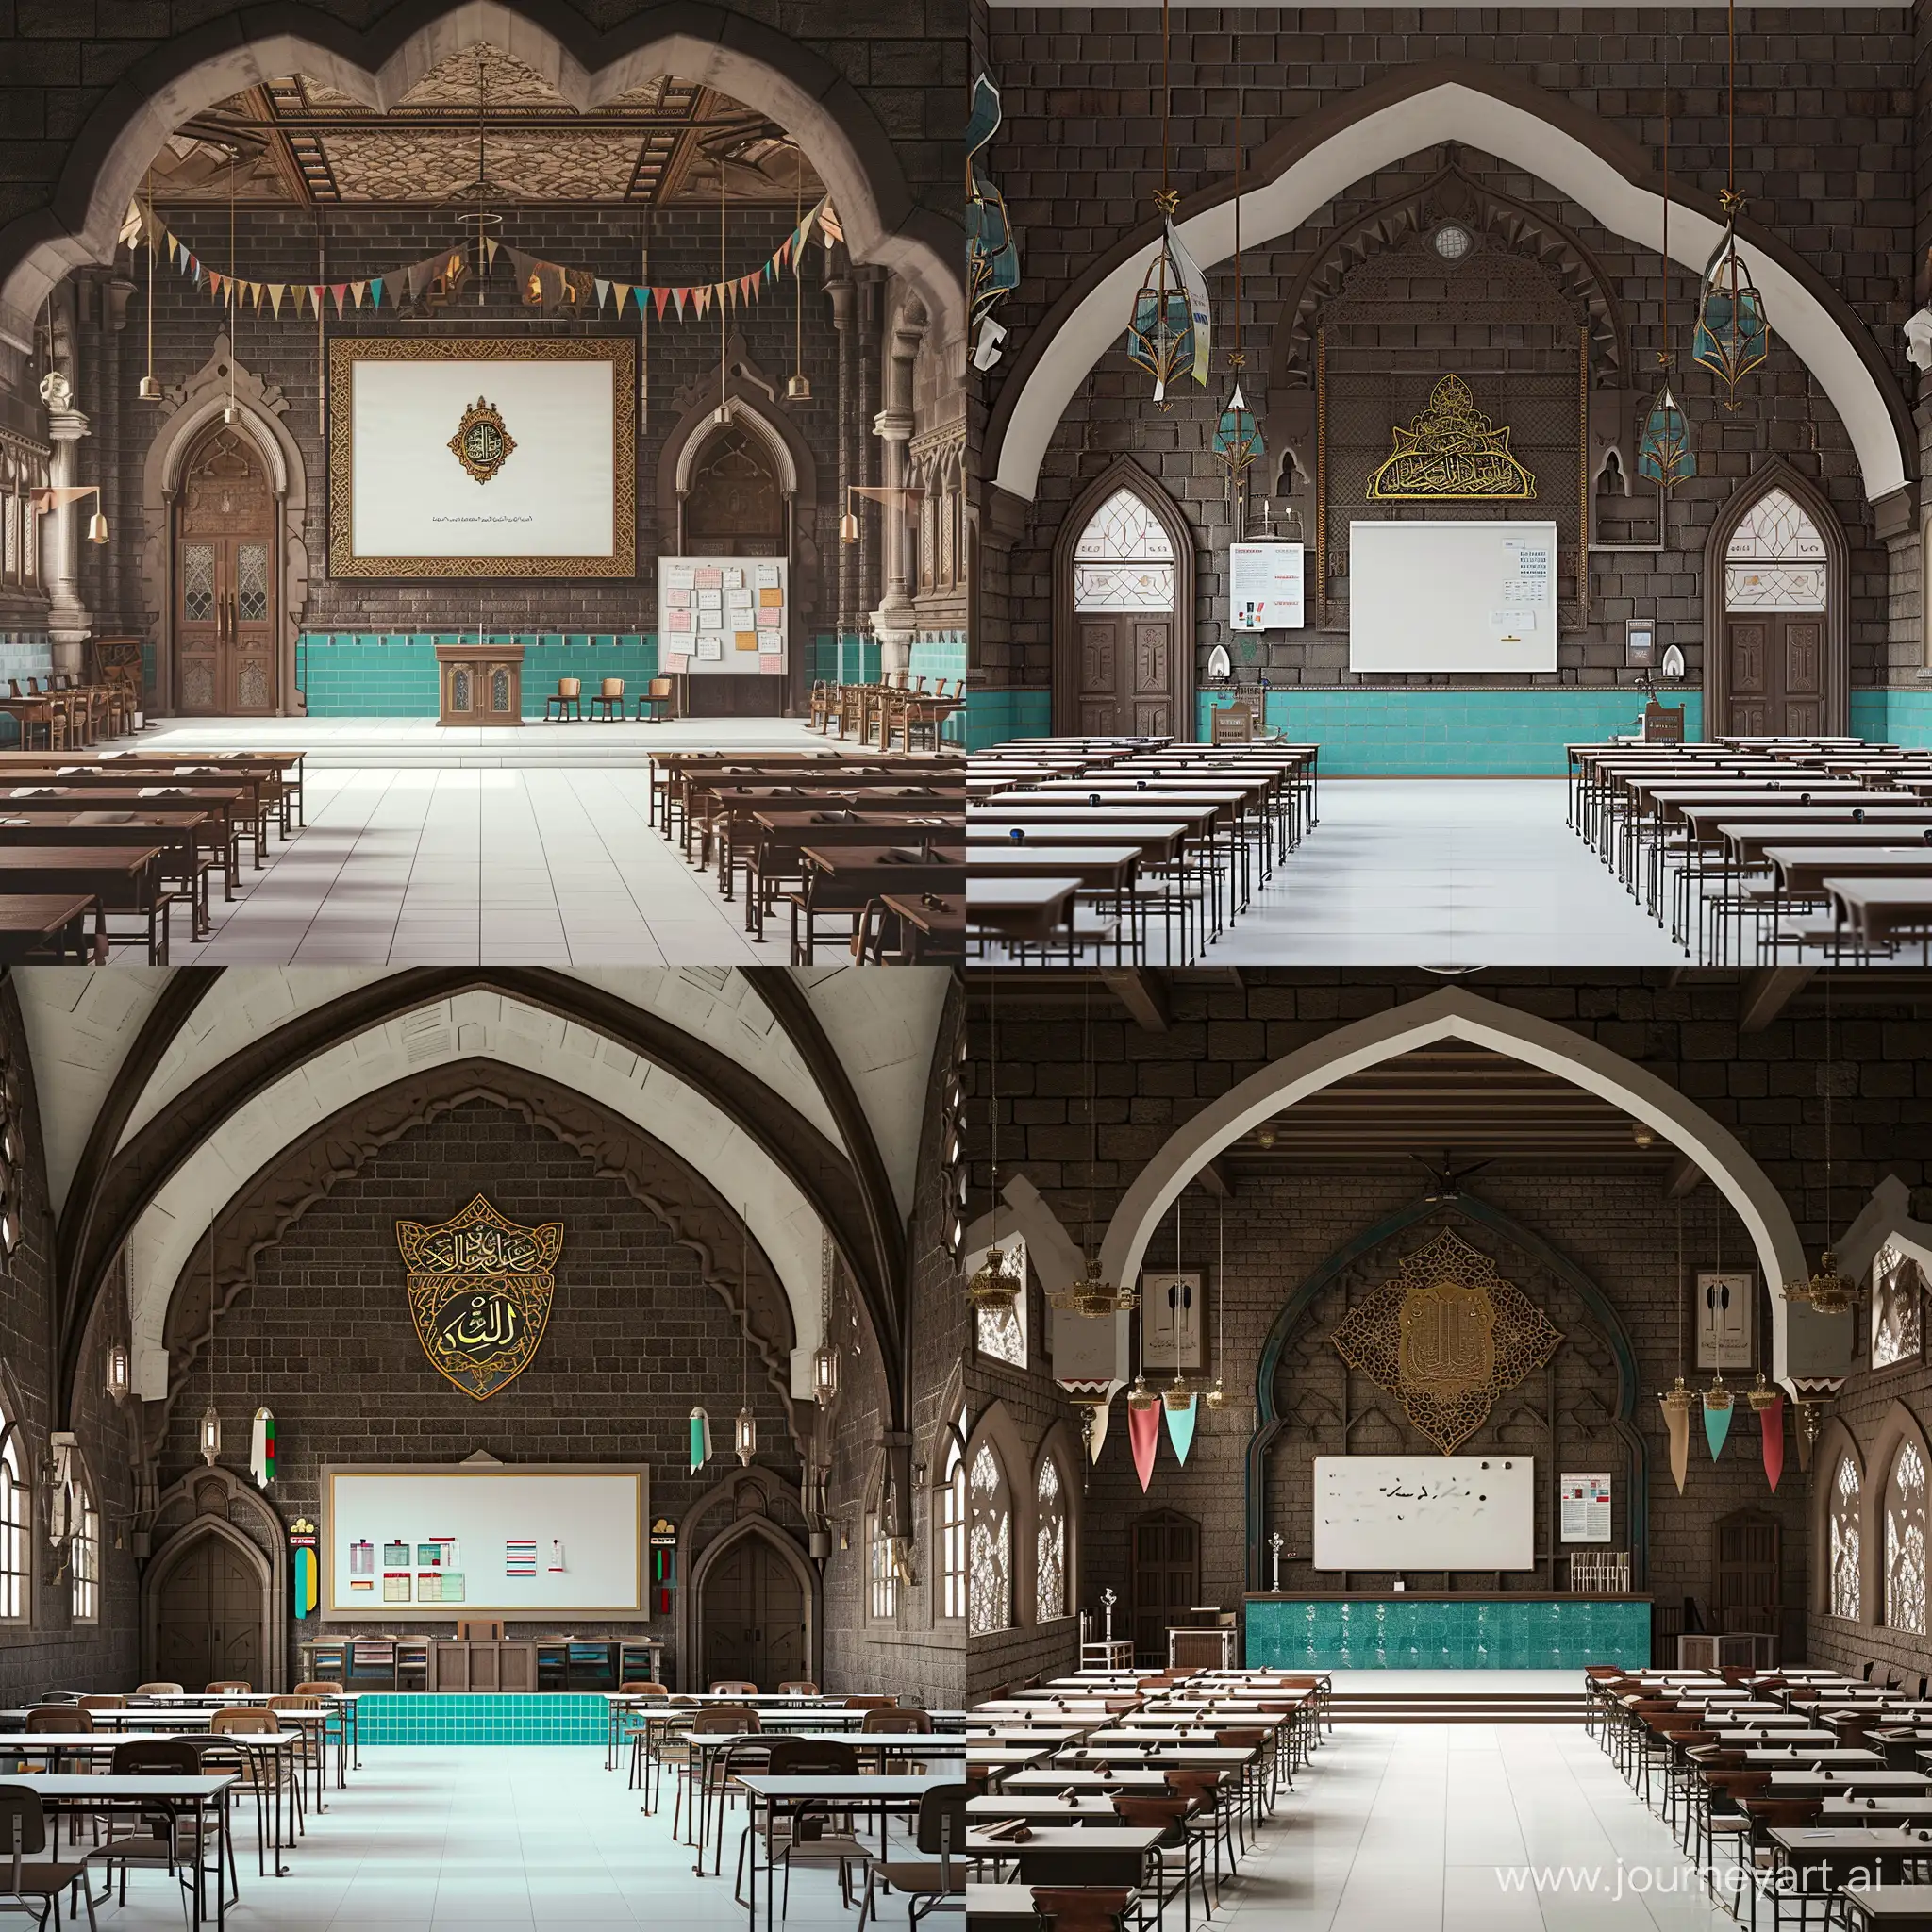 Islamic-Classroom-with-Arabesque-Frame-and-Turquoise-Tiles